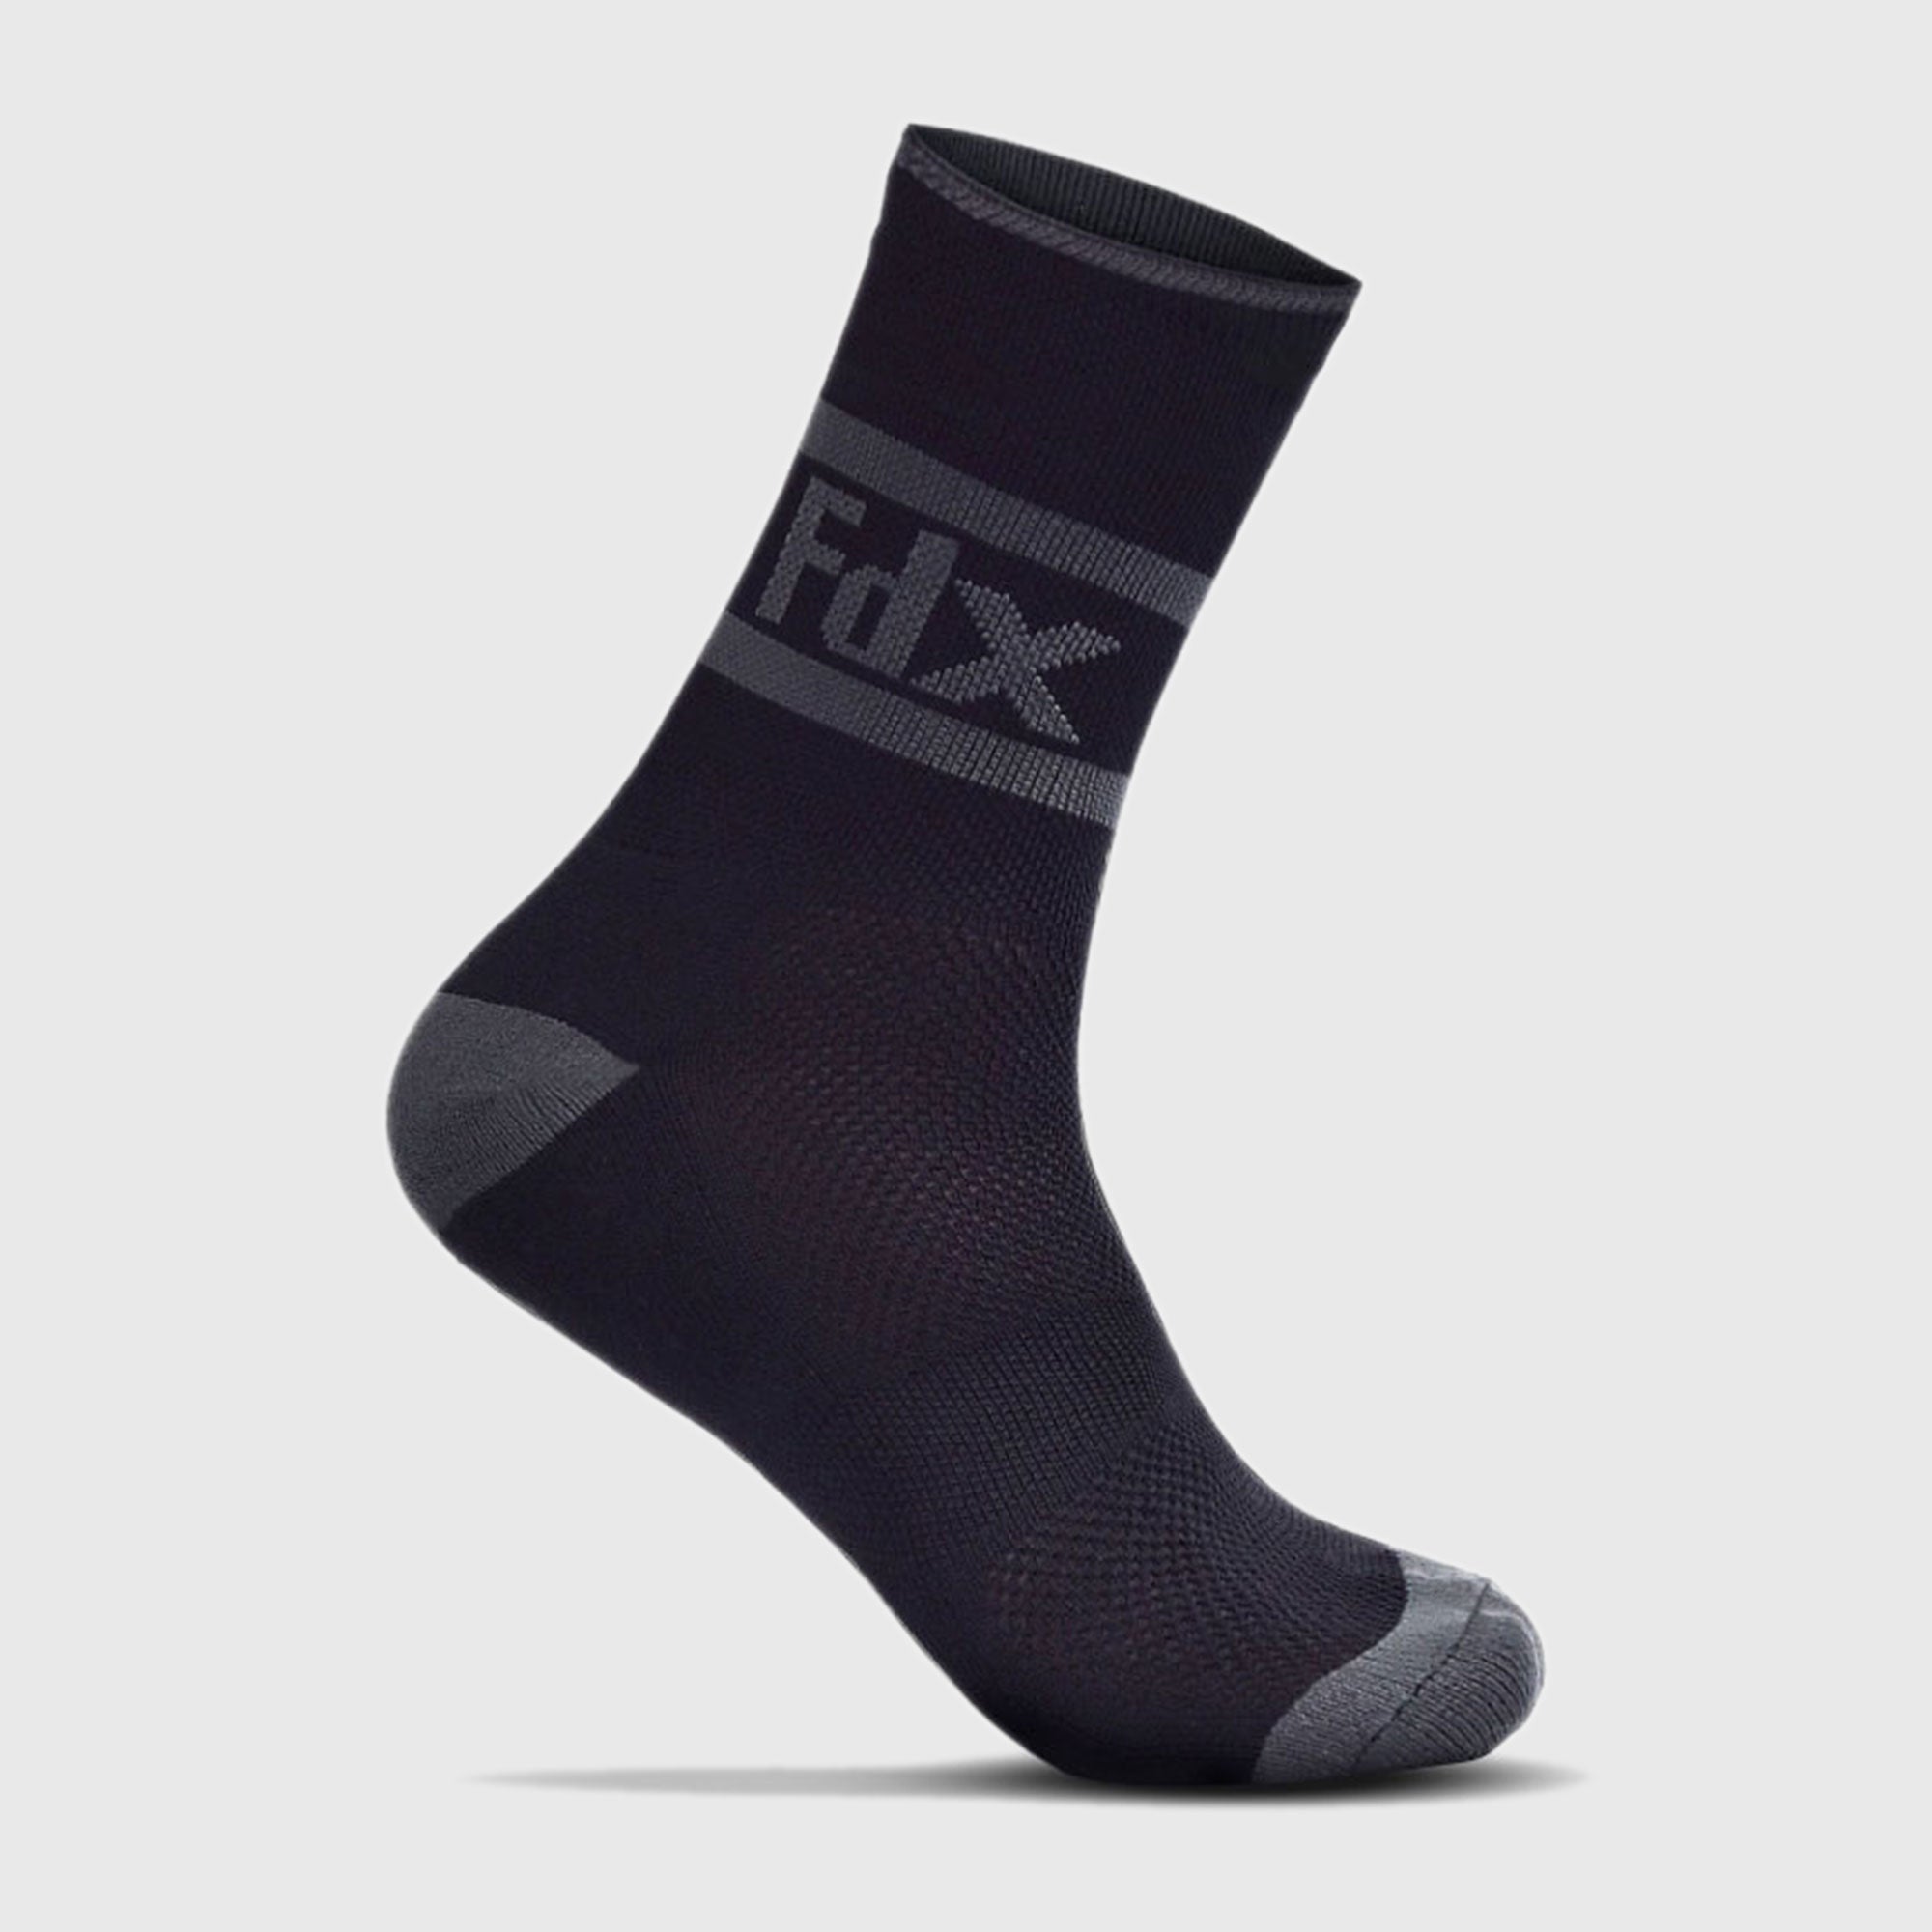 Fdx Black Compression Socks for Cycling & Running